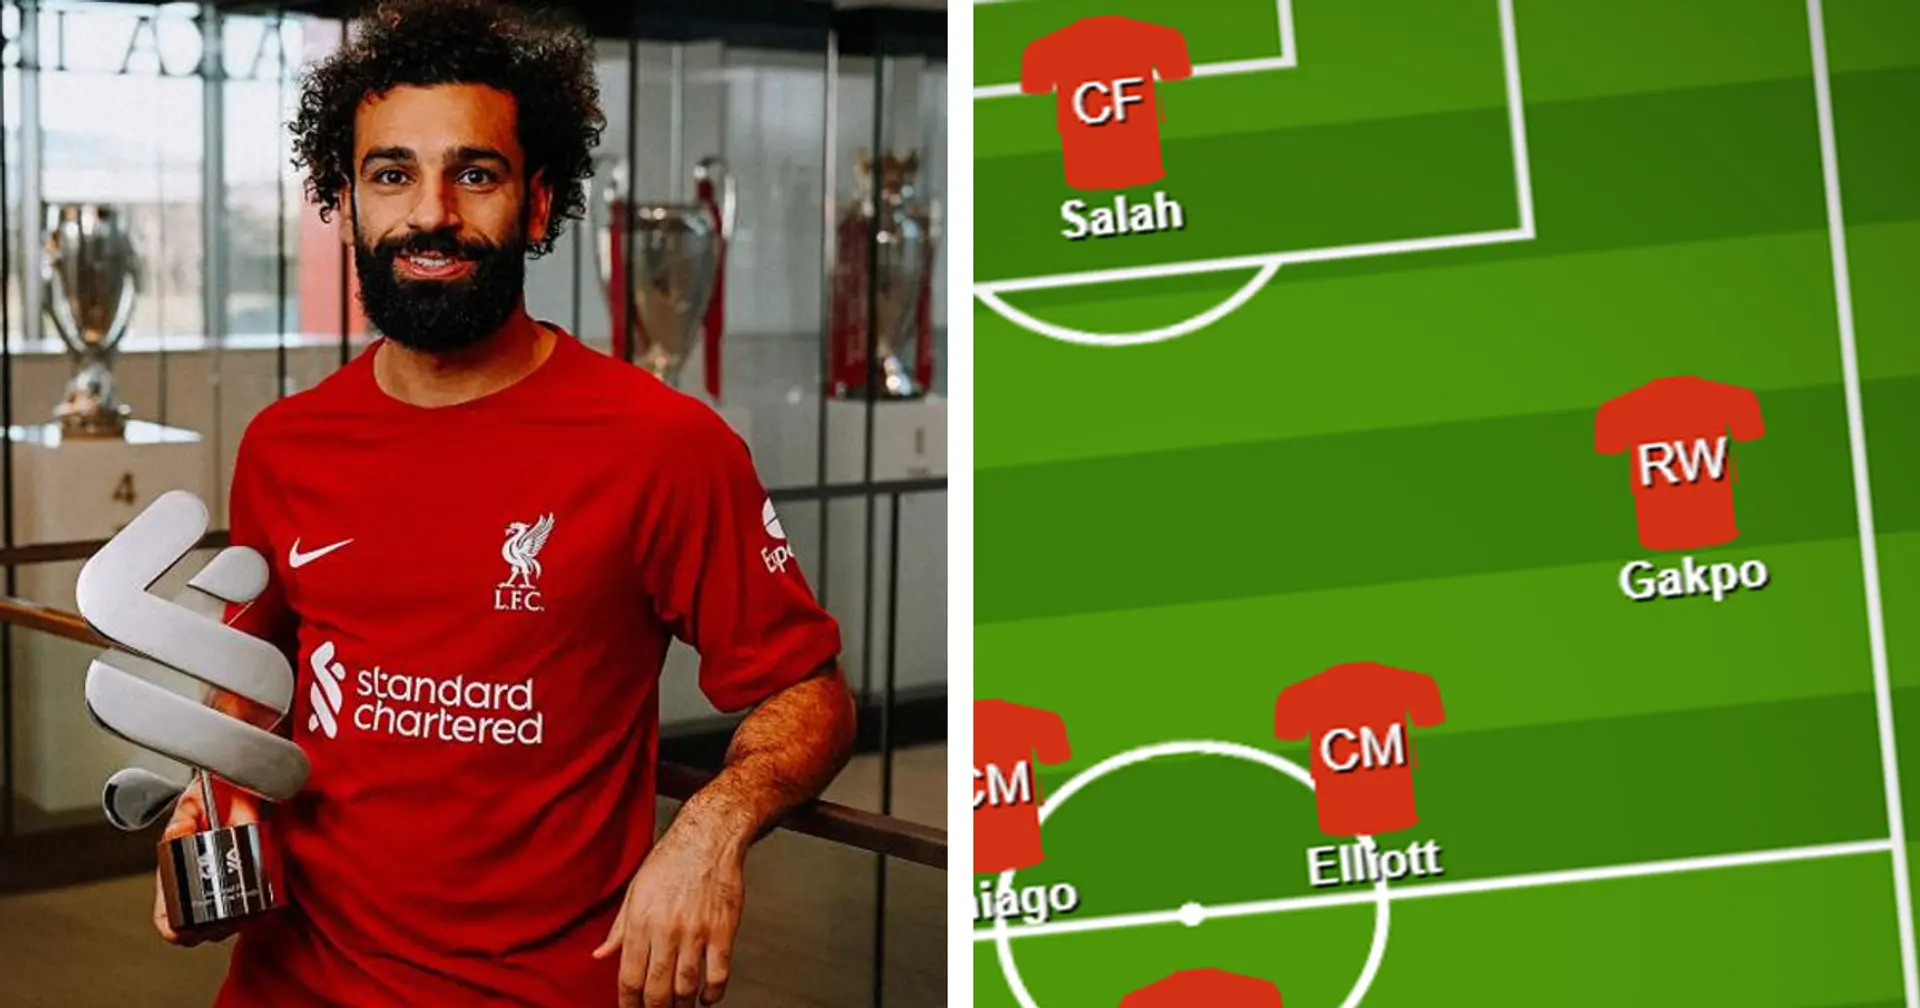 Two ways Liverpool can line up with Salah as centre-forward - shown in pics